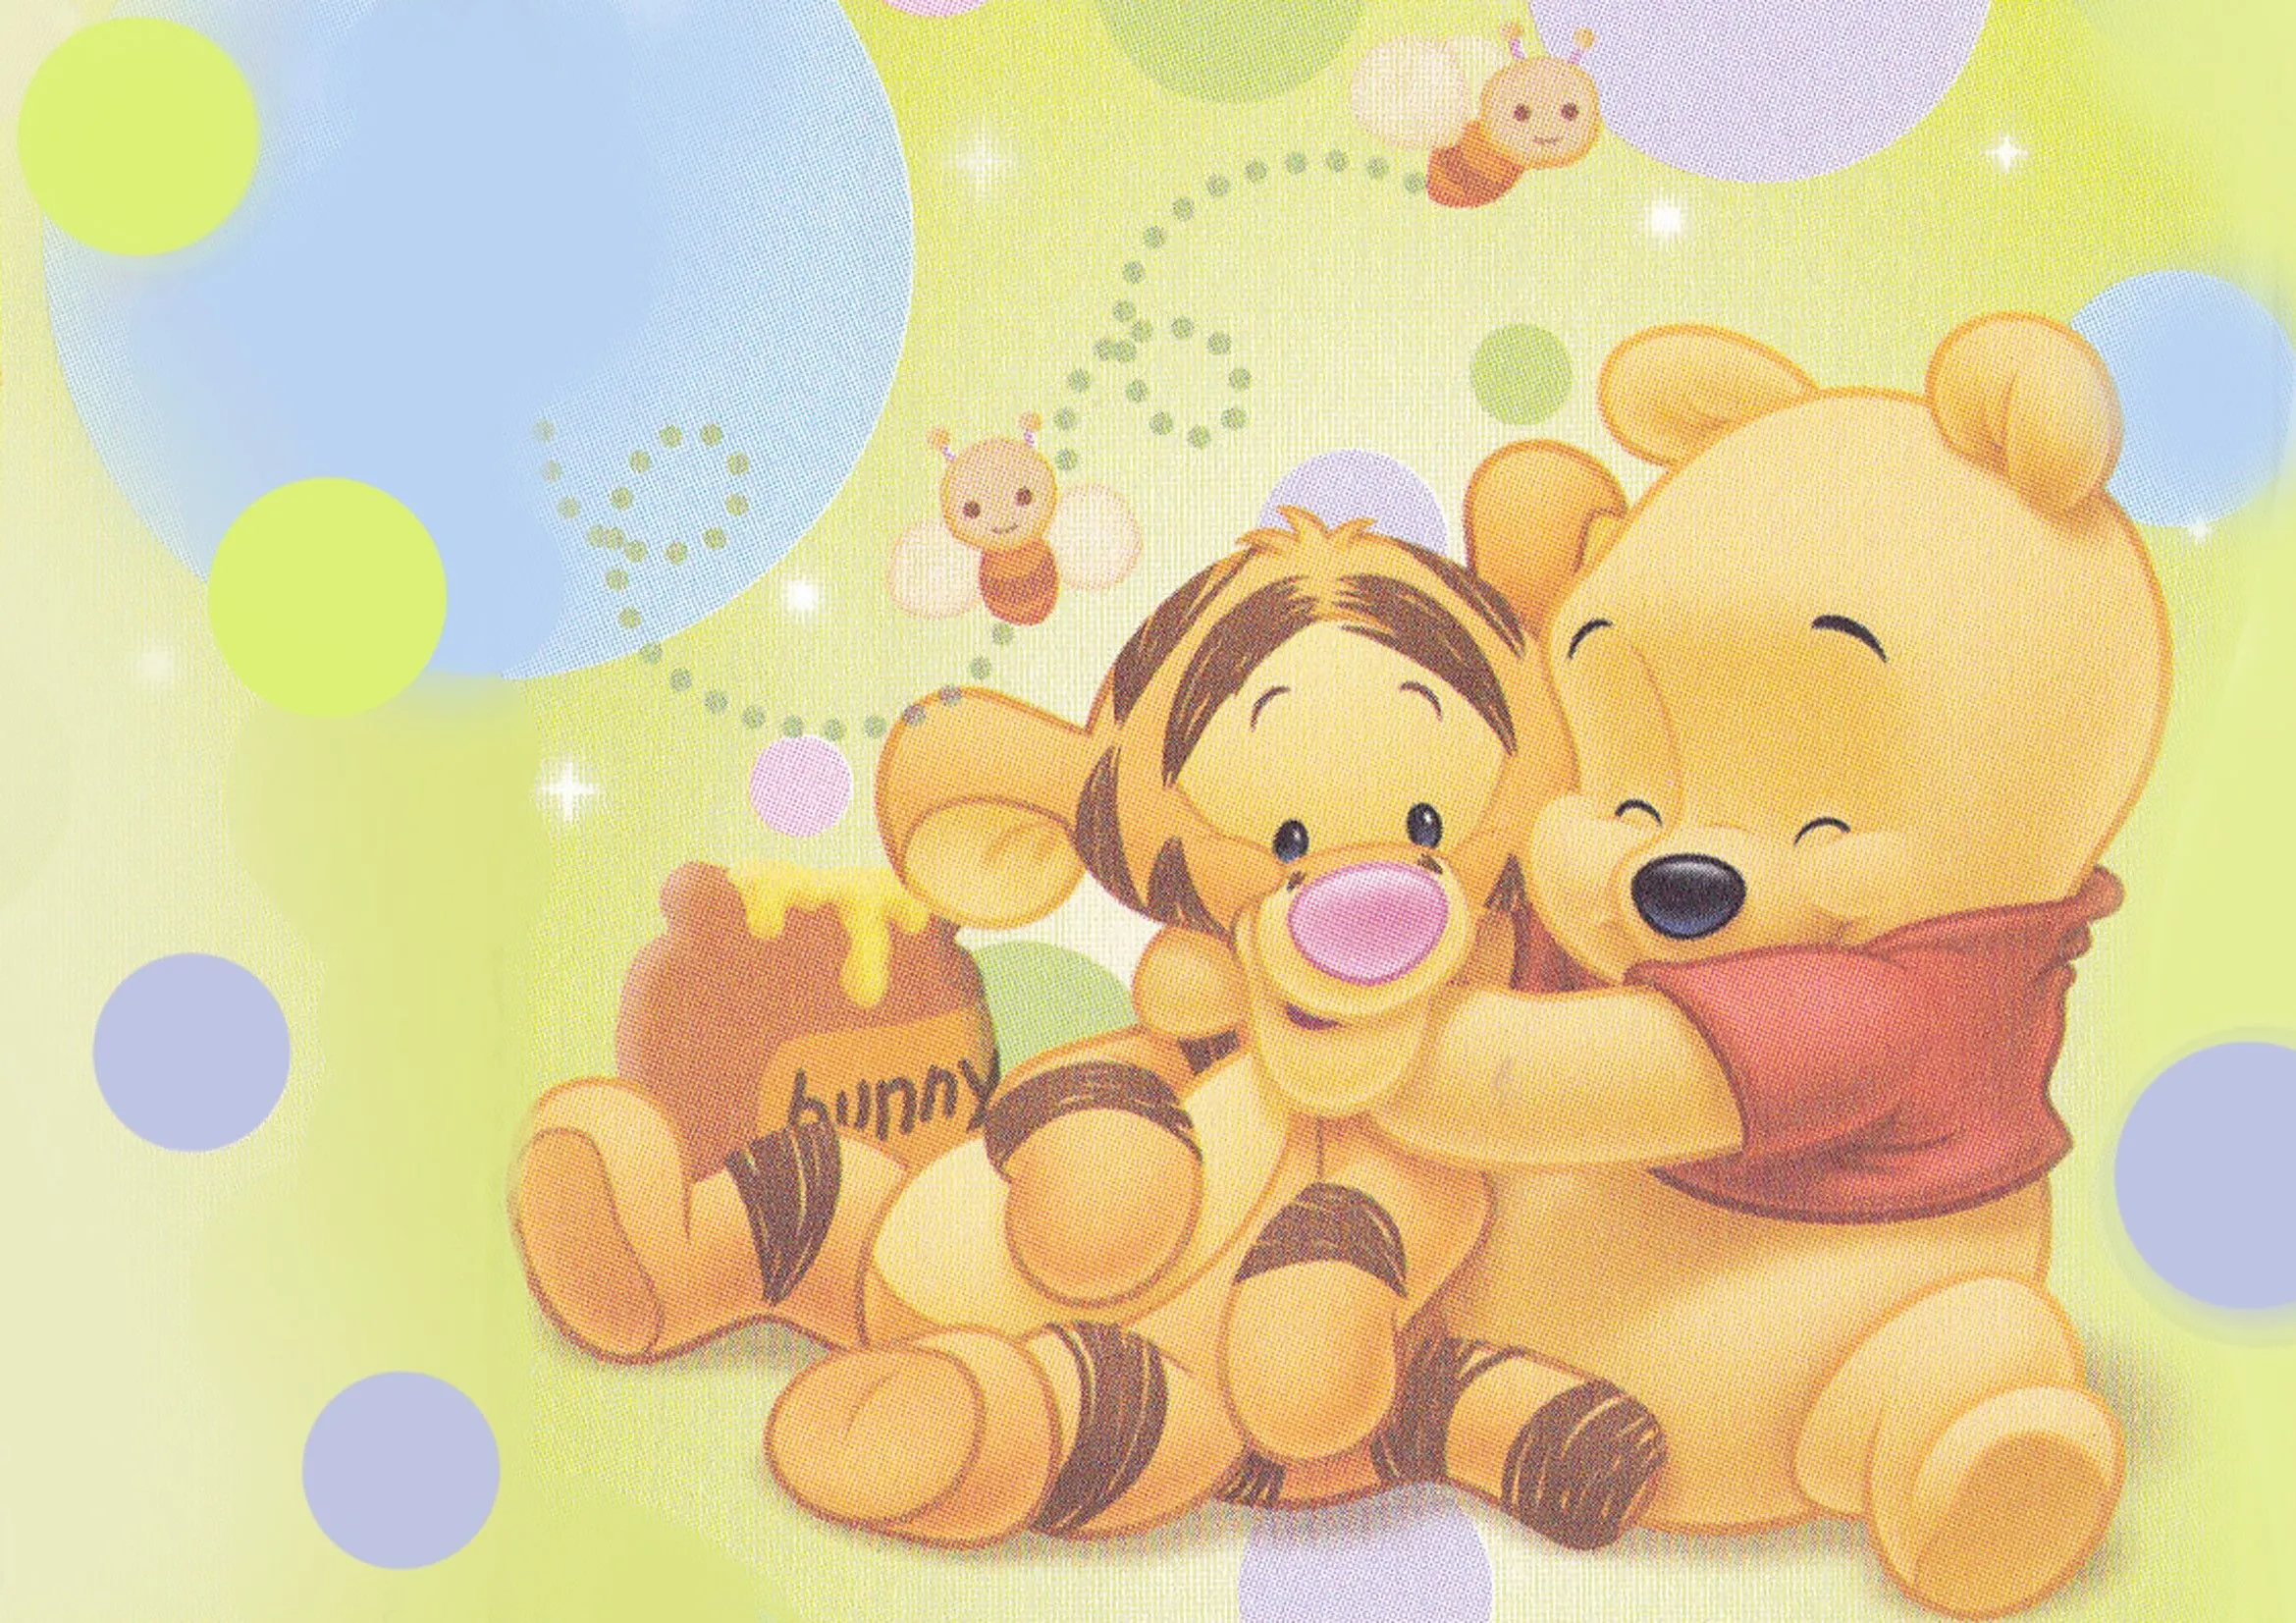 Baby pooh wallpaper - Baby Pooh Photo (30438319) - Fanpop - Page 6